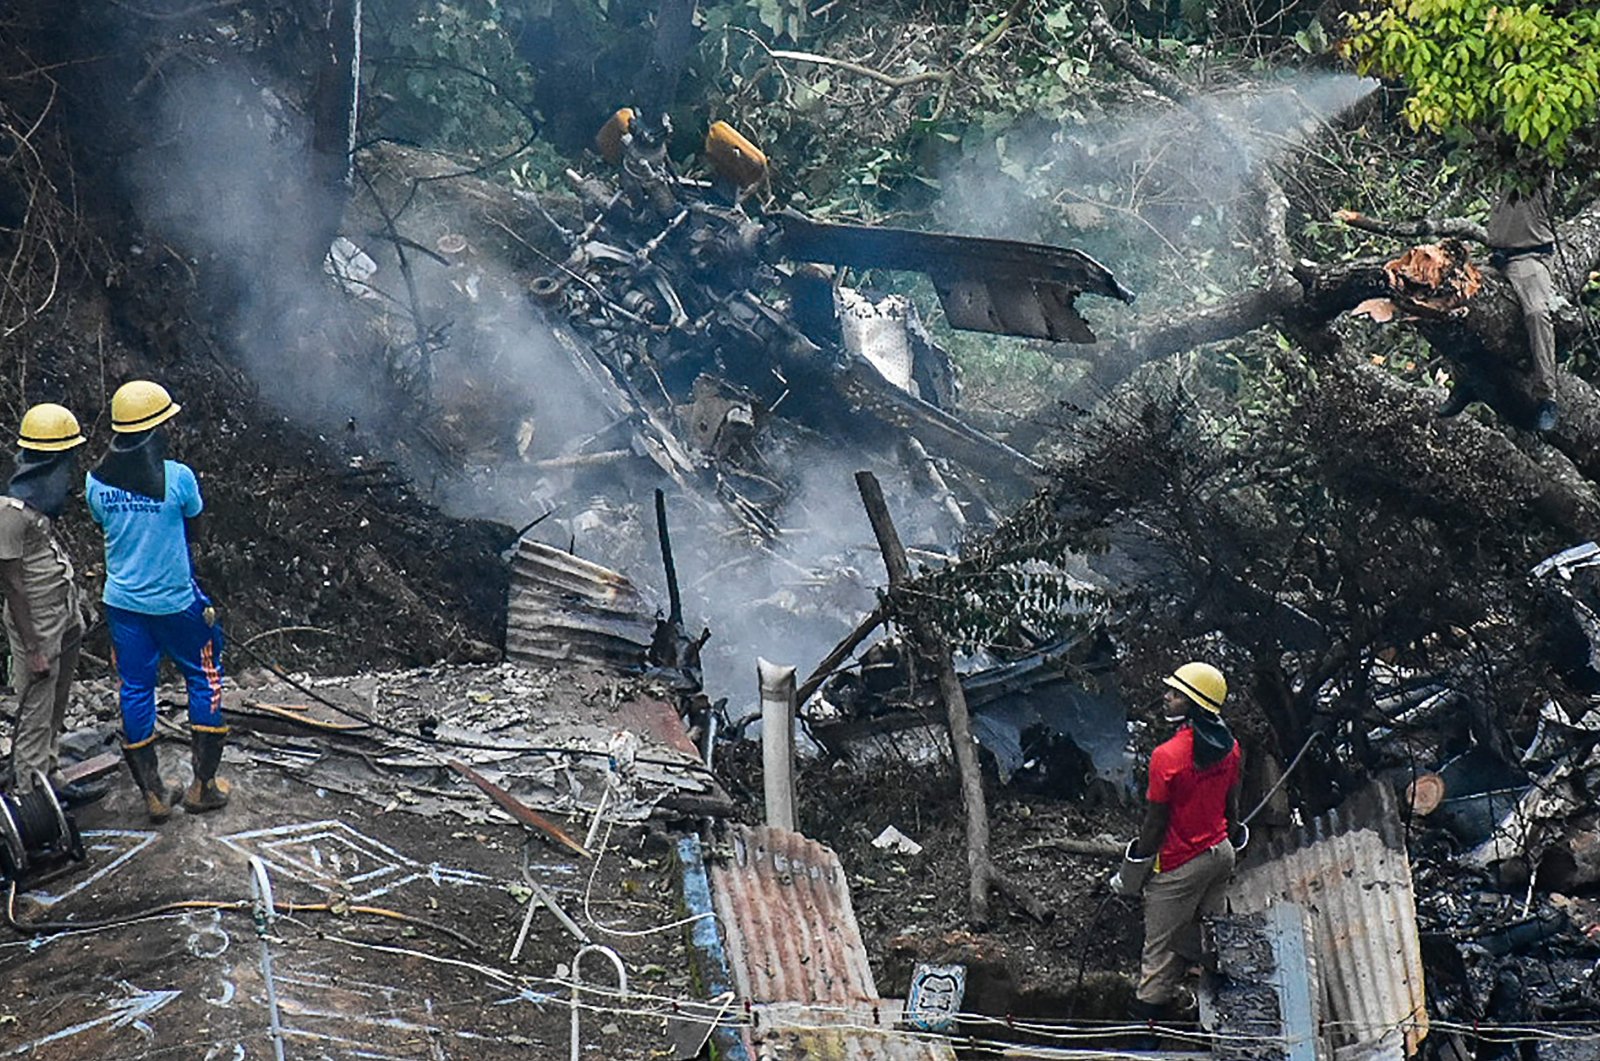 Firemen and rescue workers stand next to the debris of an IAF Mi-17V5 helicopter crash site in Coonoor, Tamil Nadu, India, Dec. 8, 2021. (AFP Photo)